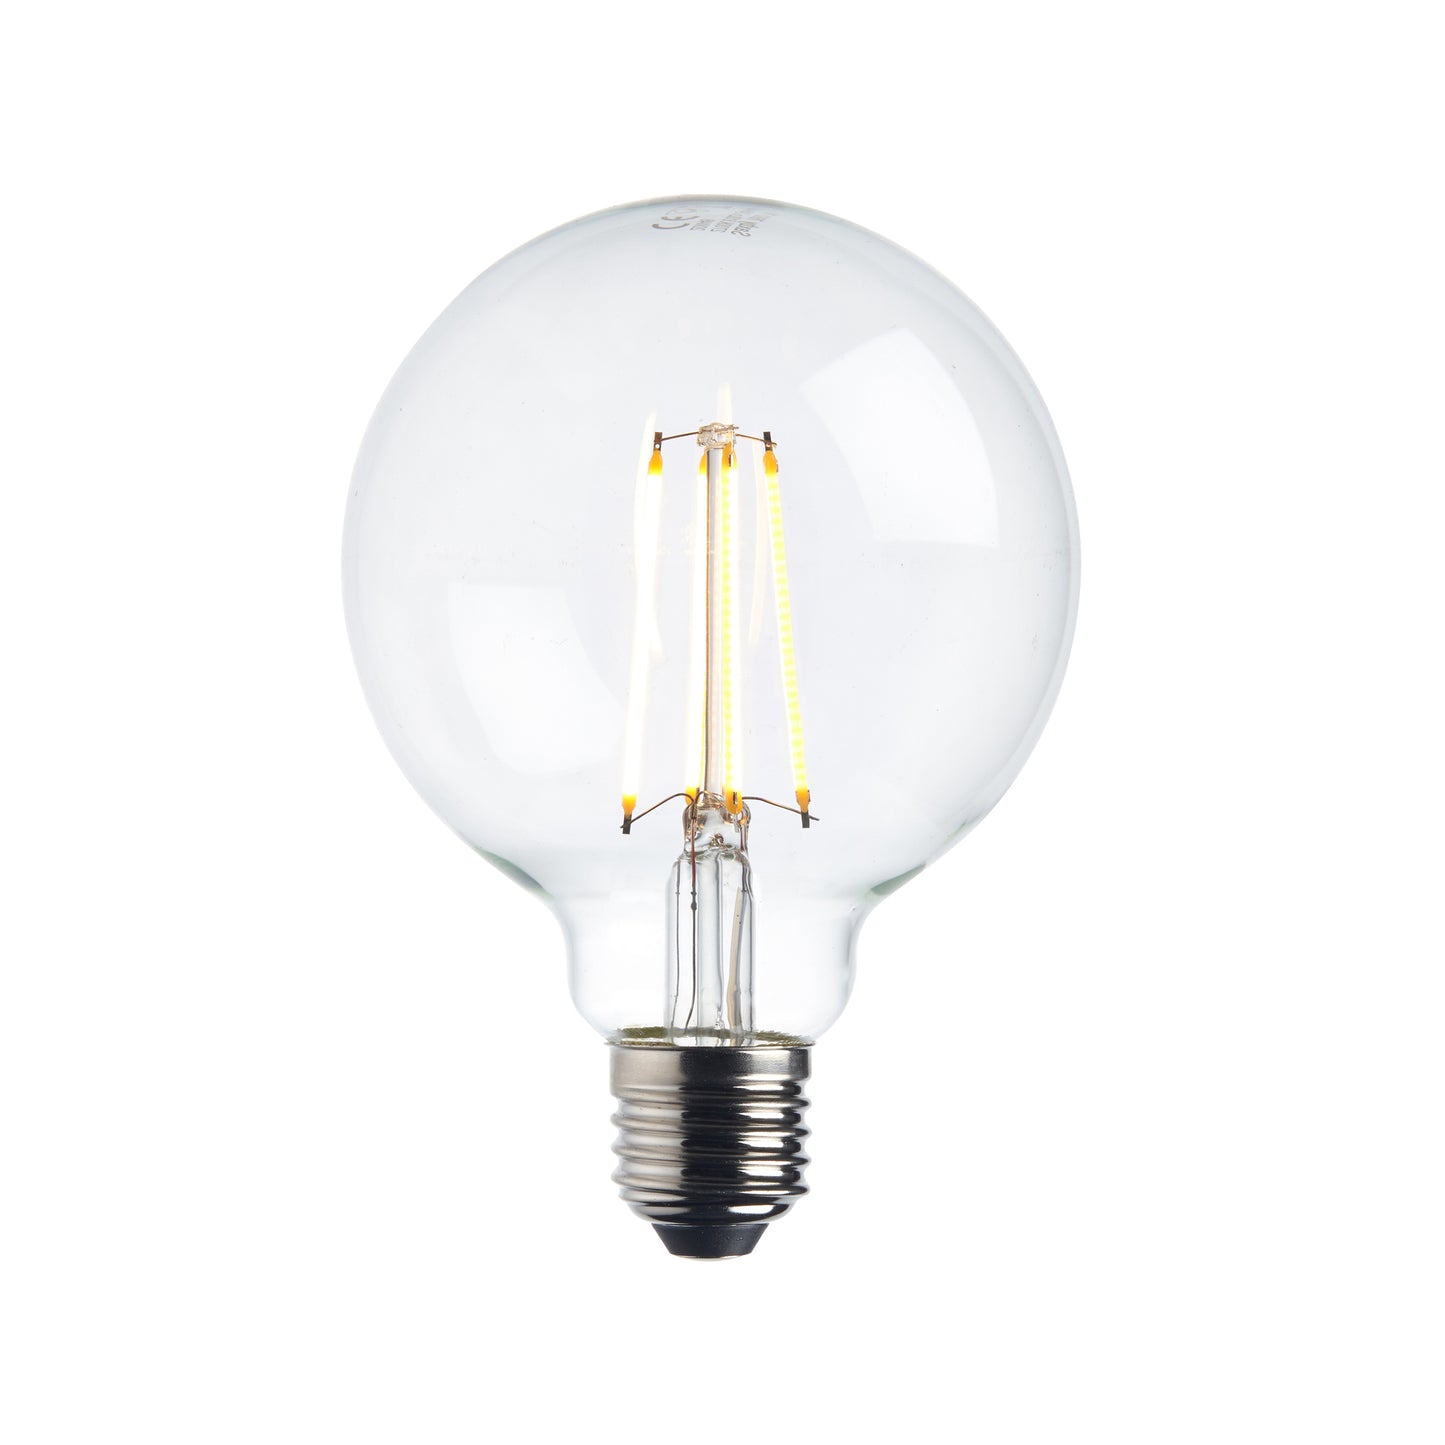 Saxby E27 LED filament globe dimmable 95mm 7W